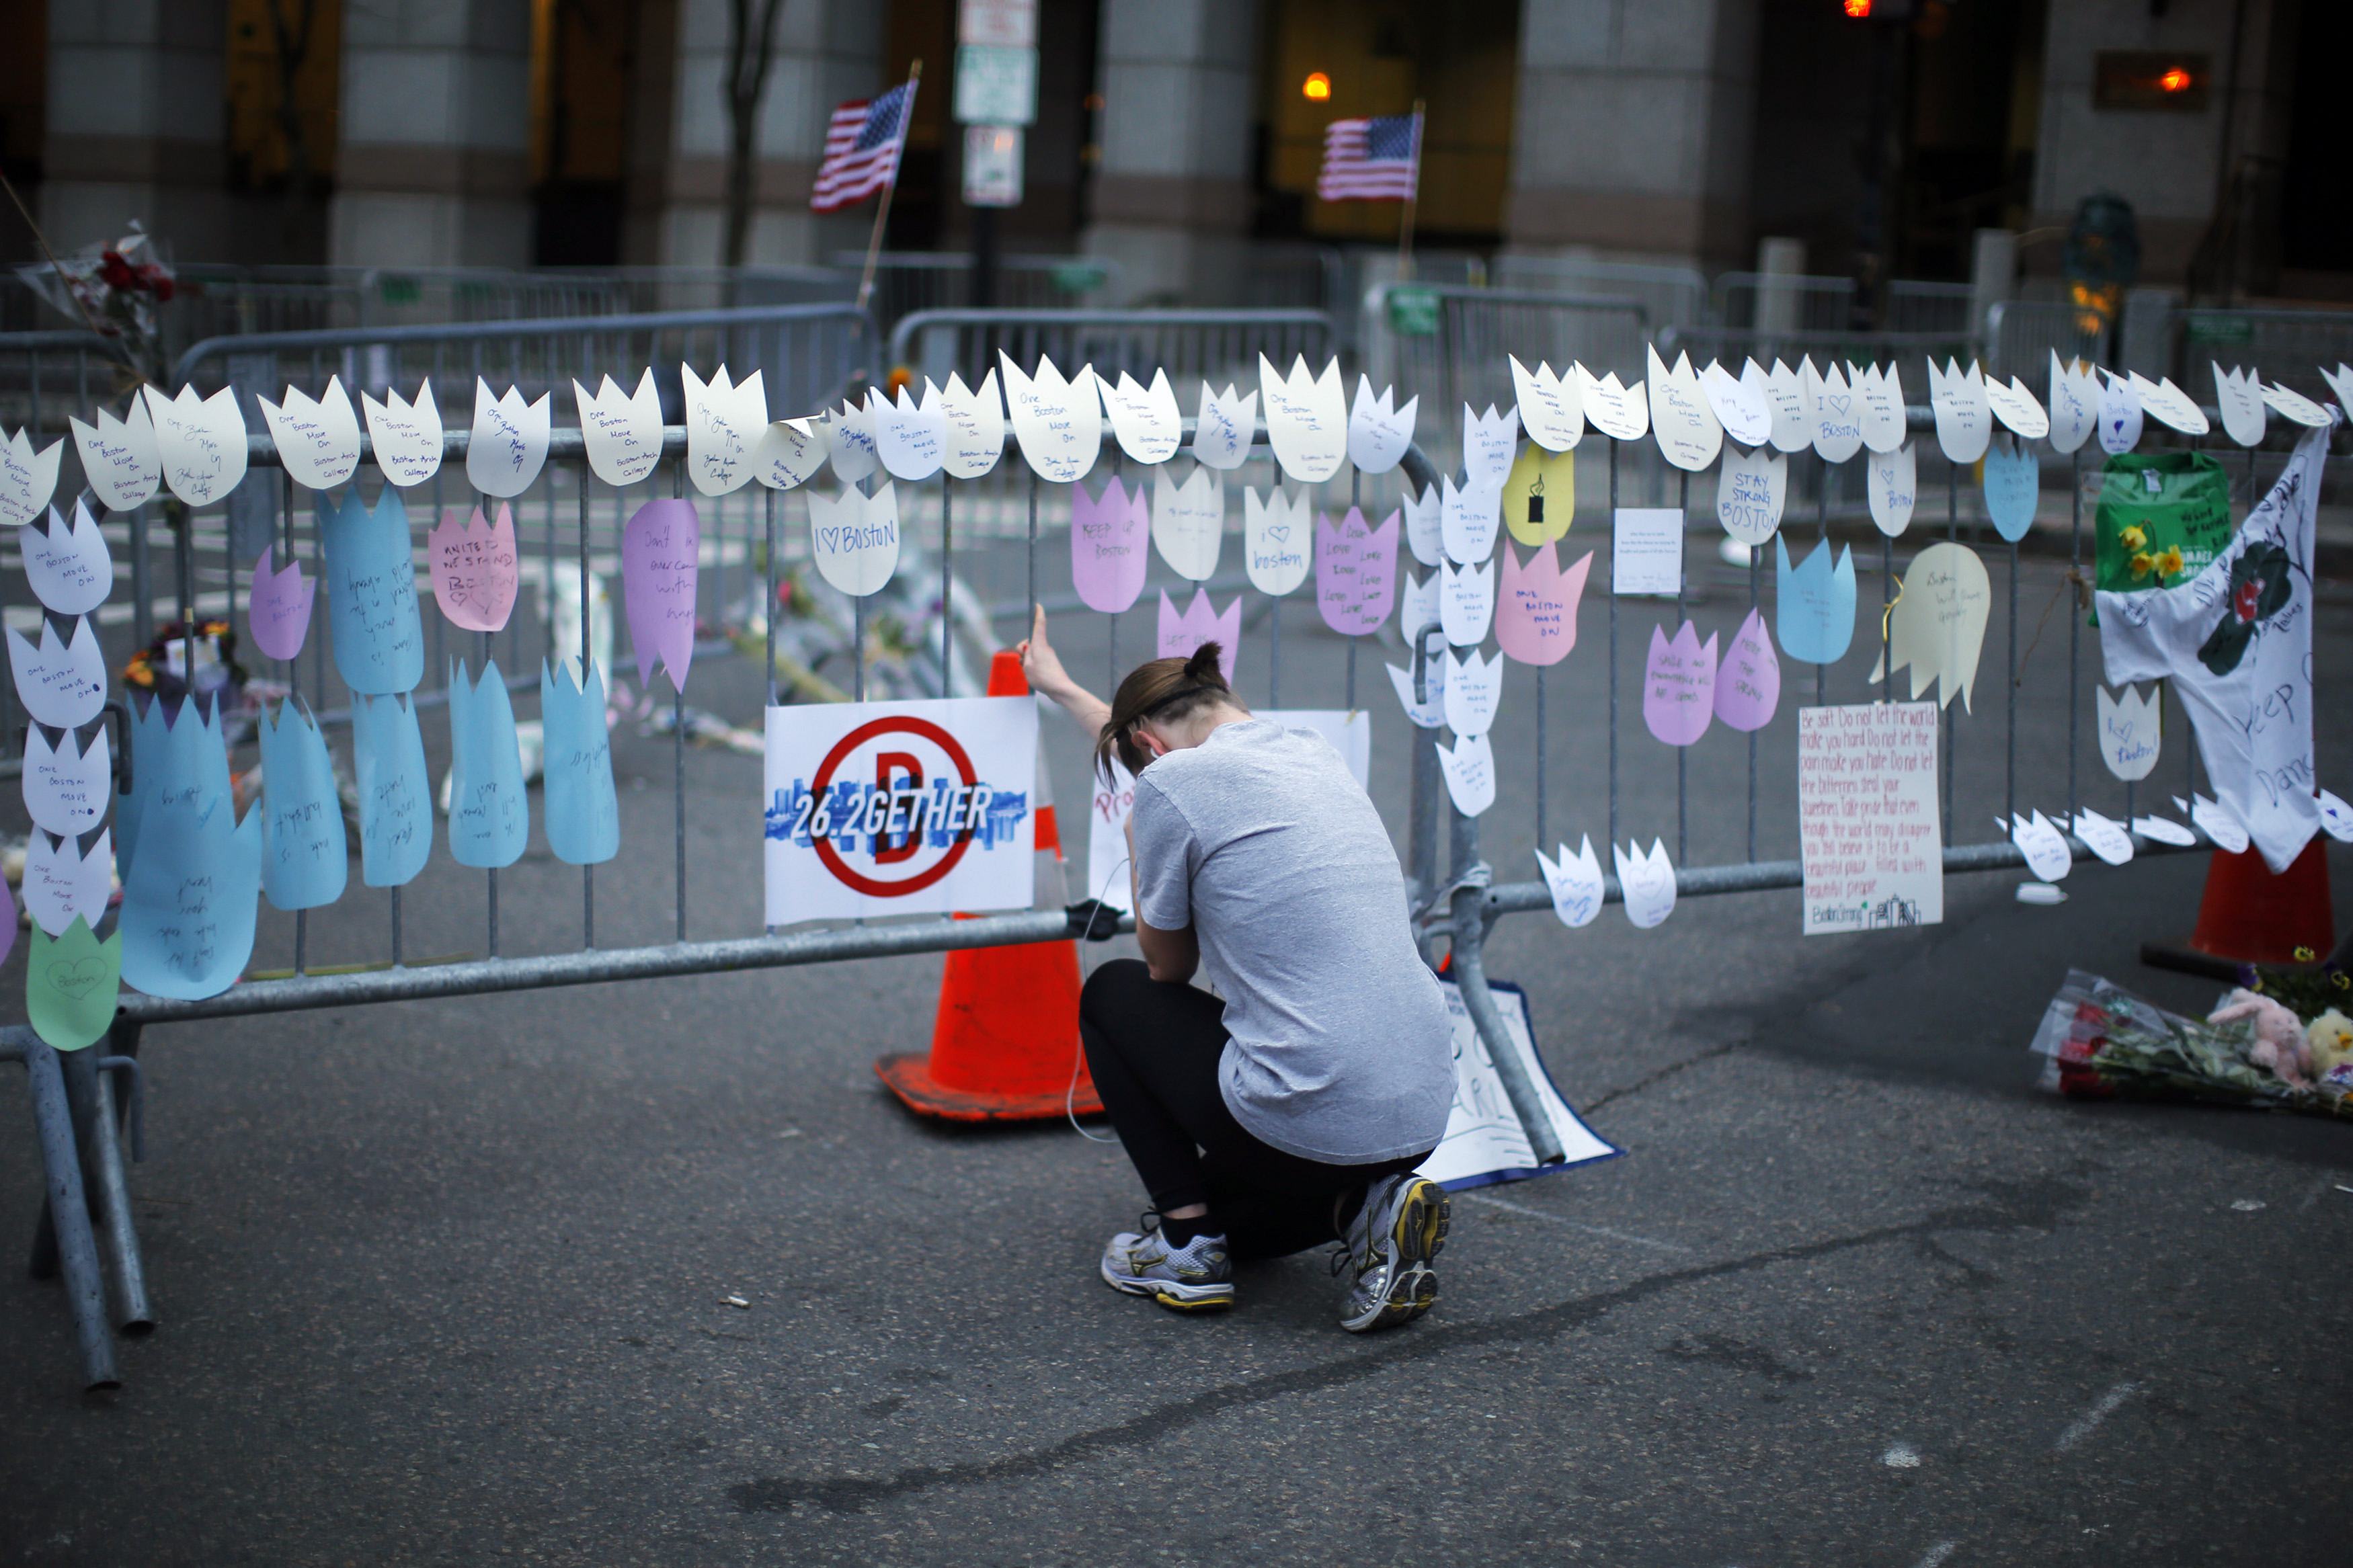 A woman kneels and cries in front of a memorial to the Boston Marathon bombings victims, at the barricades surrounding the scene in Boston, Massachusetts in this April 18, 2013 file photo. (Brian Snyder/REUTERS)